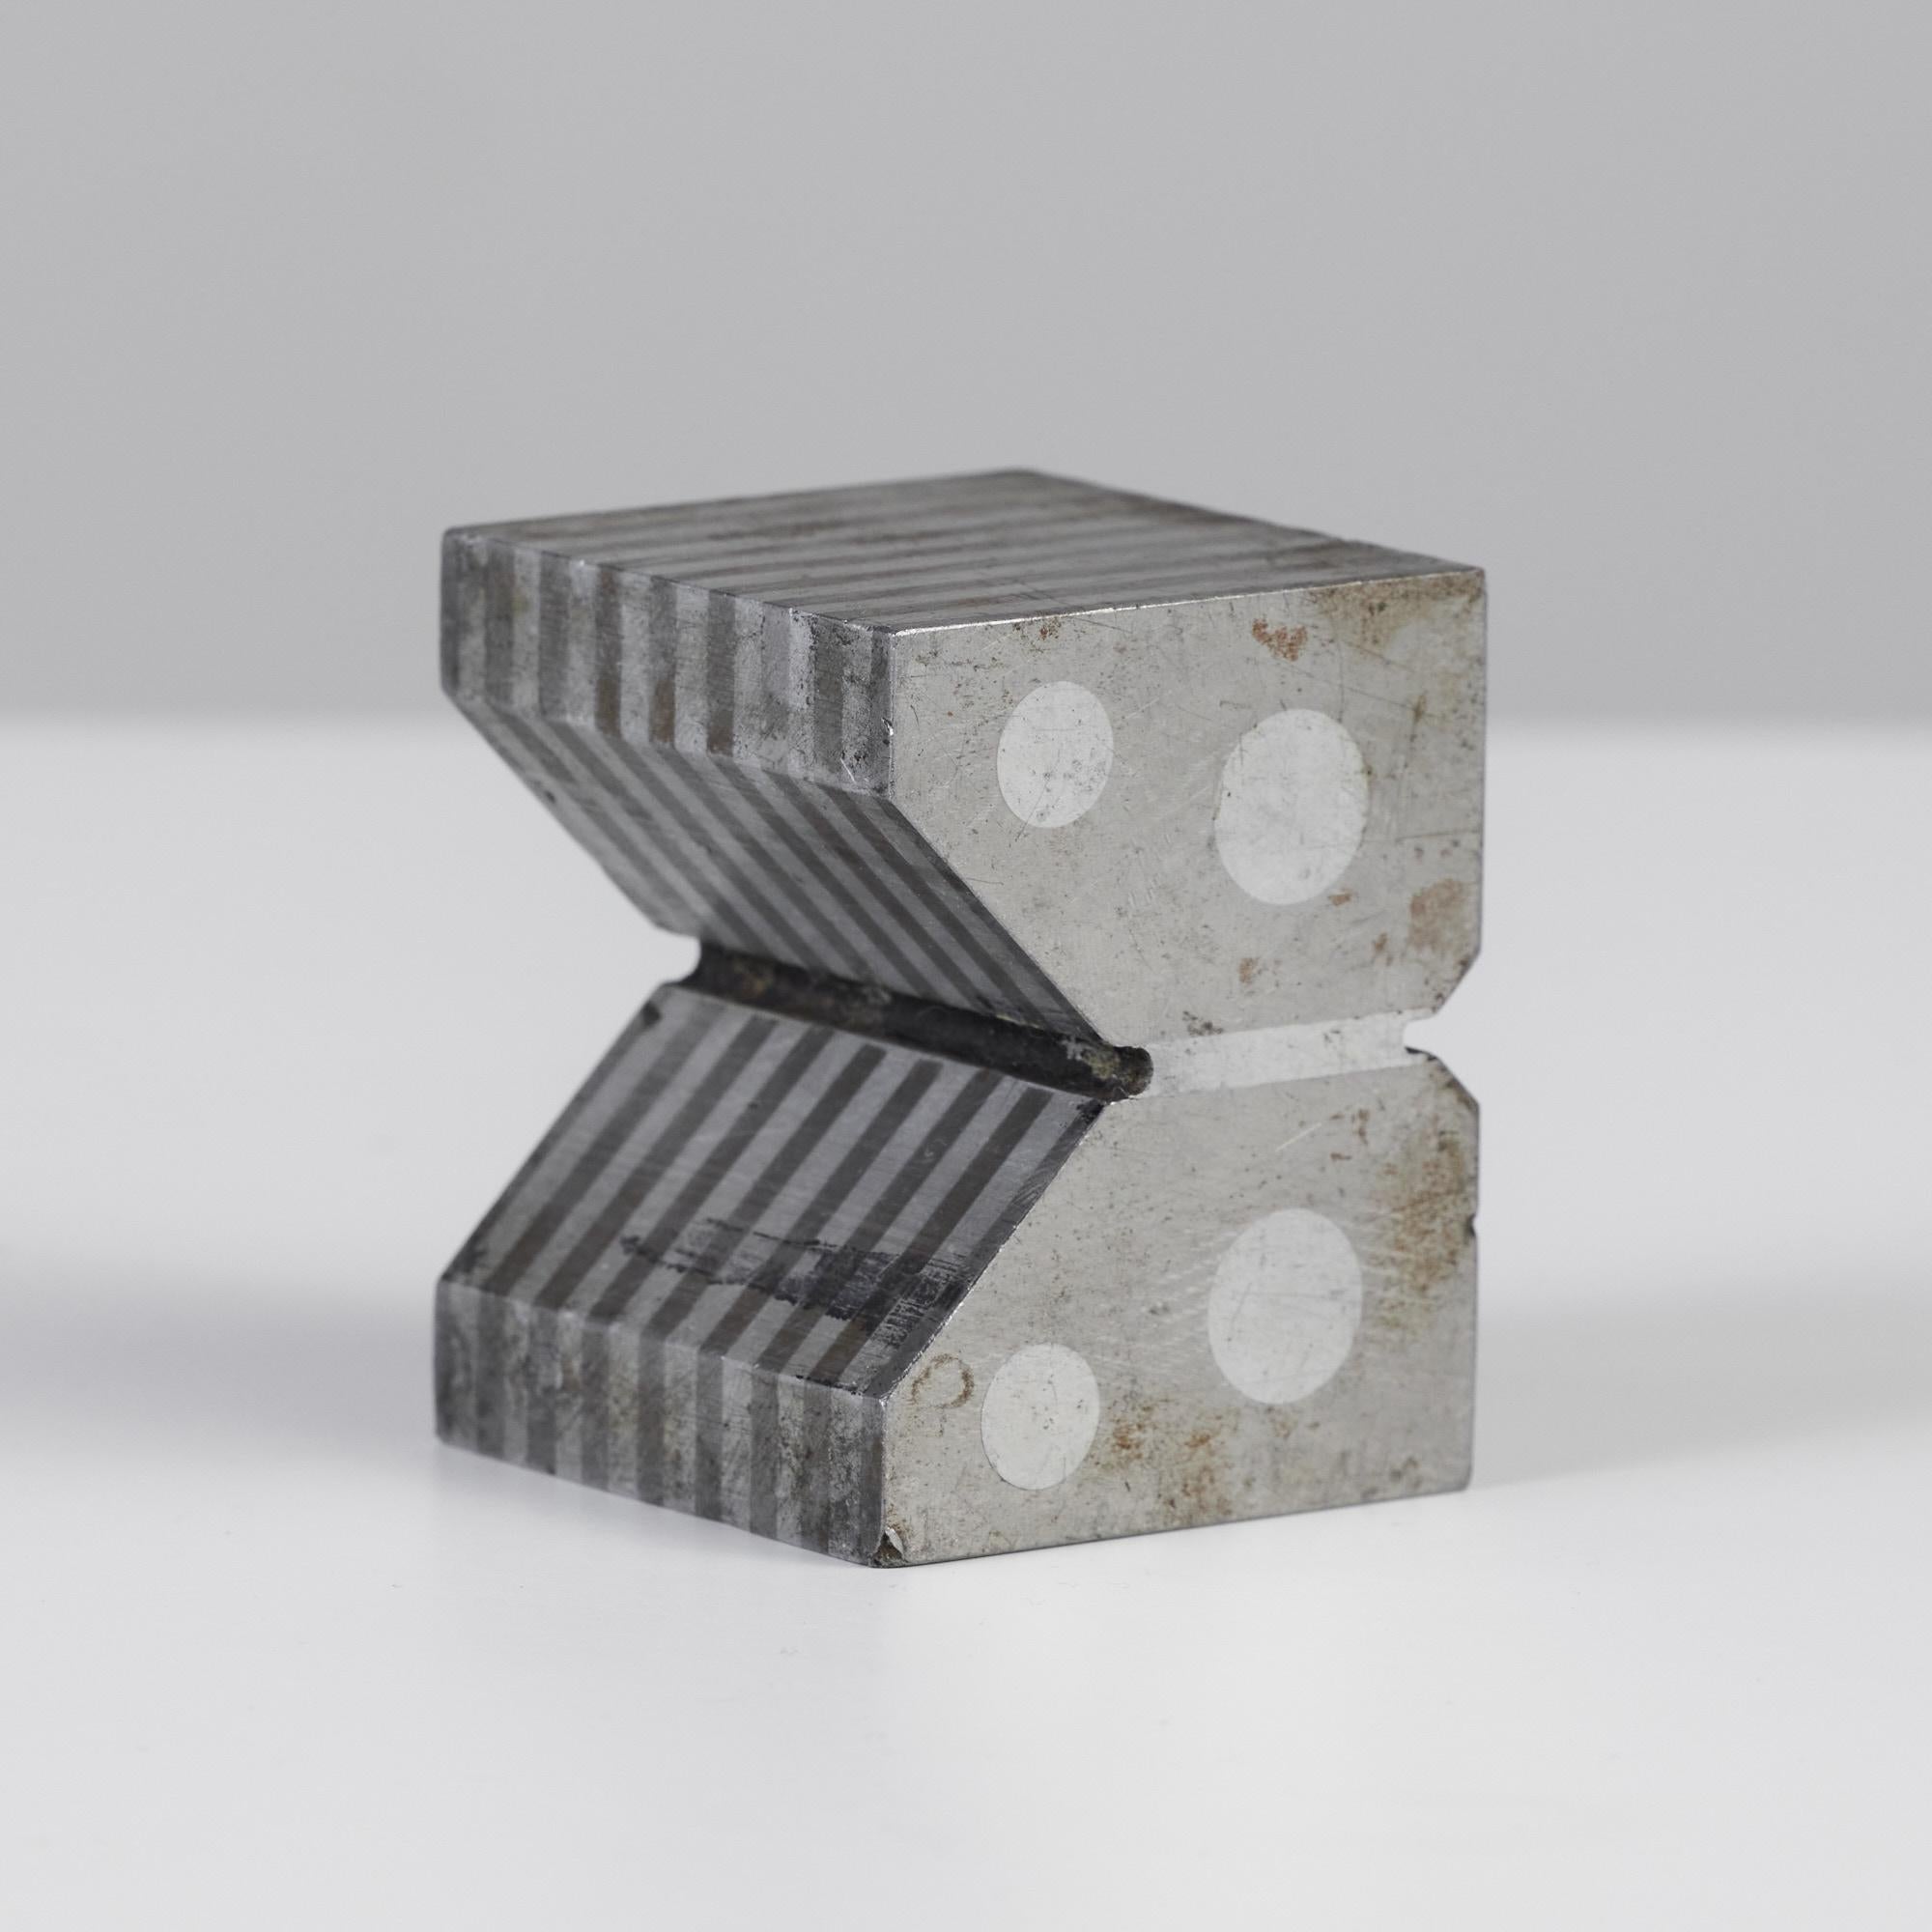 Industrial machine block brutalist form featuring alternating striations along the sides with four steel dots on either end. The geometric block can be used as bookends or as a decorative element.

Sold individually; two available.